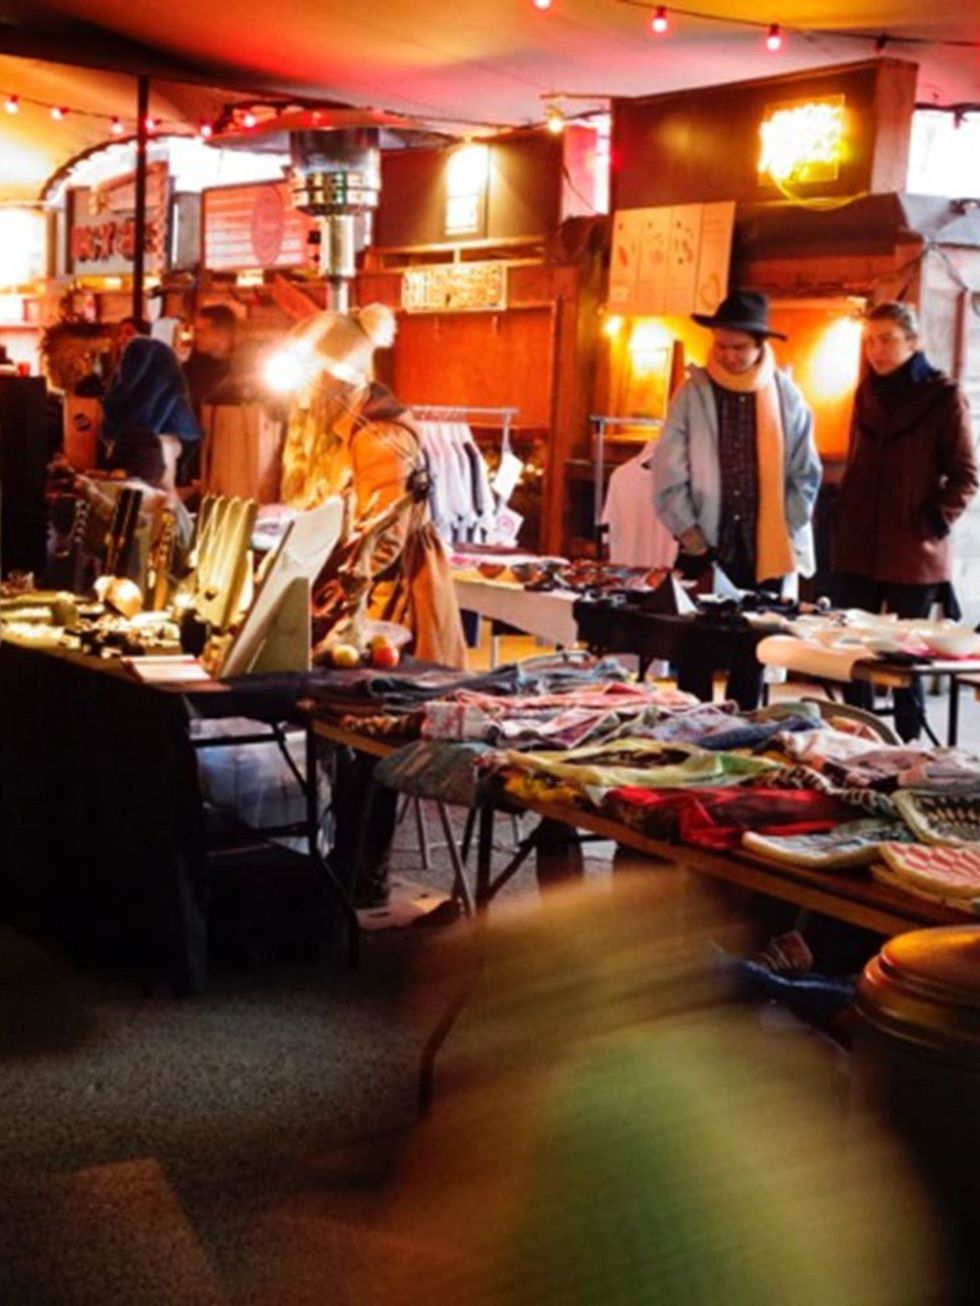 <p>SHOPPING: Shoreditch Christmas Market and Winter Gathering</p>

<p>Still got shopping to do? Well, you COULD come to this bringing together of all things upcycled and vintage, treat your loved ones to affordable artworks, handmade textiles, hip homewar